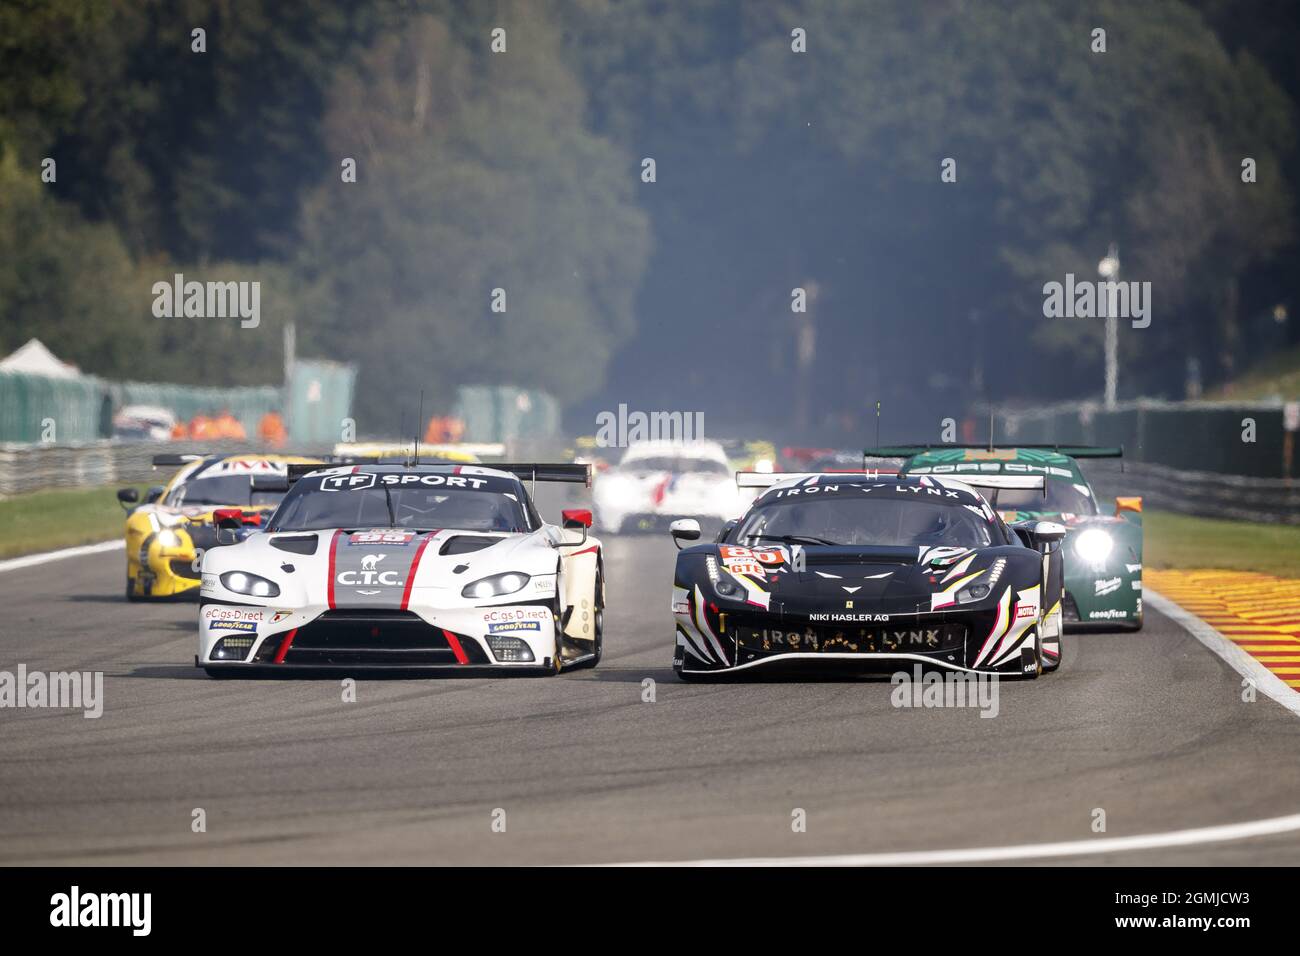 95 Hartshorne John (gbr), Gunn Ross (gbr), Hancock Oliver (gbr), TF Sport, Aston Martin Vantage - AMR, action, 80 Cressoni Matteo (ita), Mastronardi Rino (ita), Molina Miguel (esp), Iron Lynx, Ferrari 488 GTE Evo, action, during the 2021 4 Hours of Spa-Francorchamps, 5th round of the 2021 European Le Mans Series, from September 17 to 19, 2021 on the Circuit de Spa-Francorchamps, in Stavelot, Belgium - Photo: Frederic Le Floc H/DPPI/LiveMedia Stock Photo